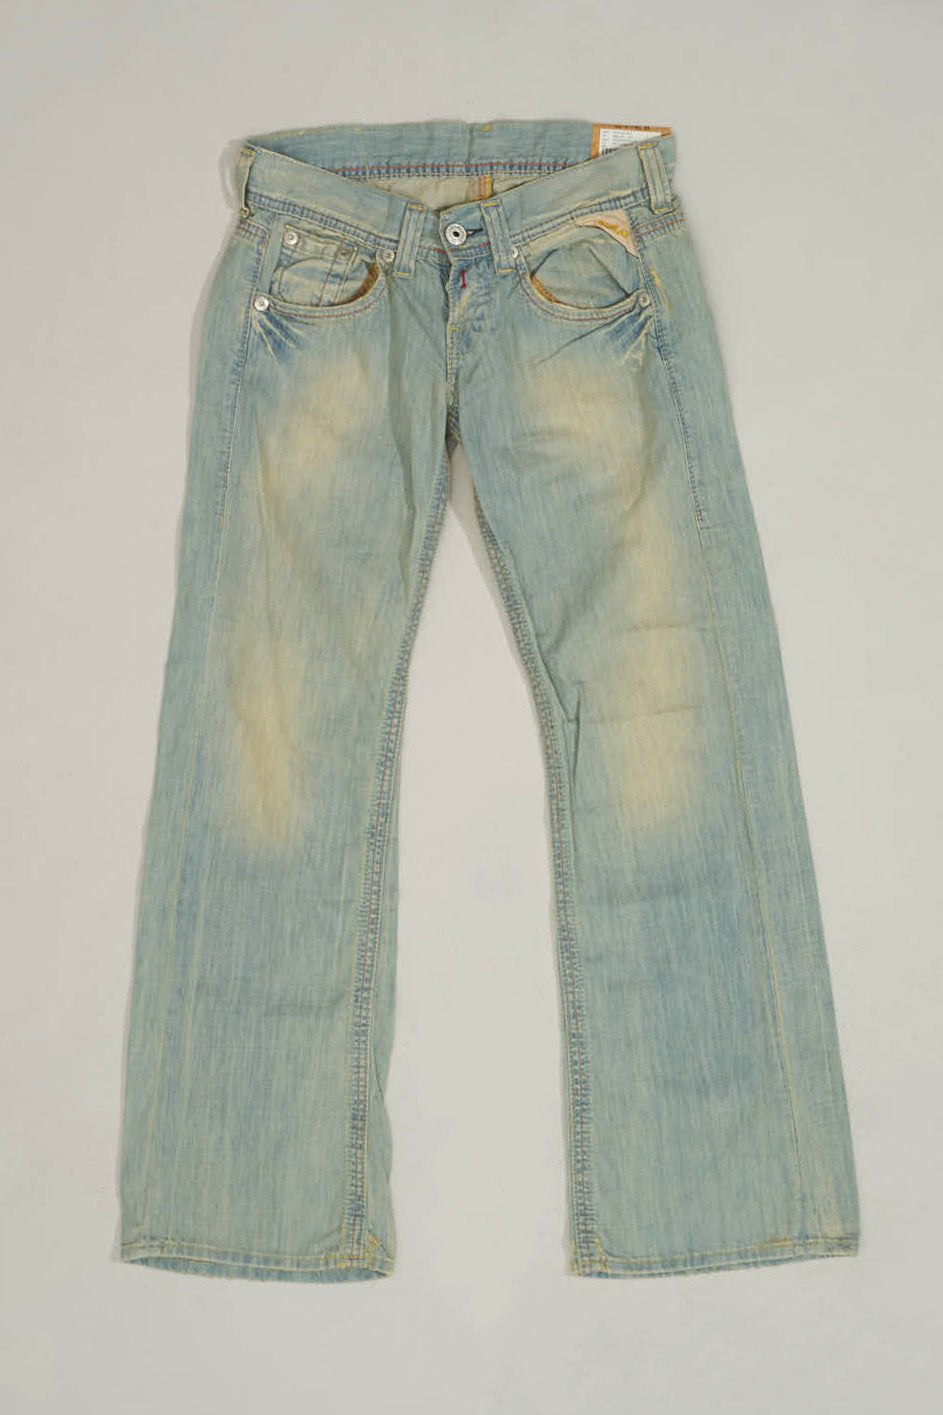 REPLAY ELECTRA Jeans - M/L